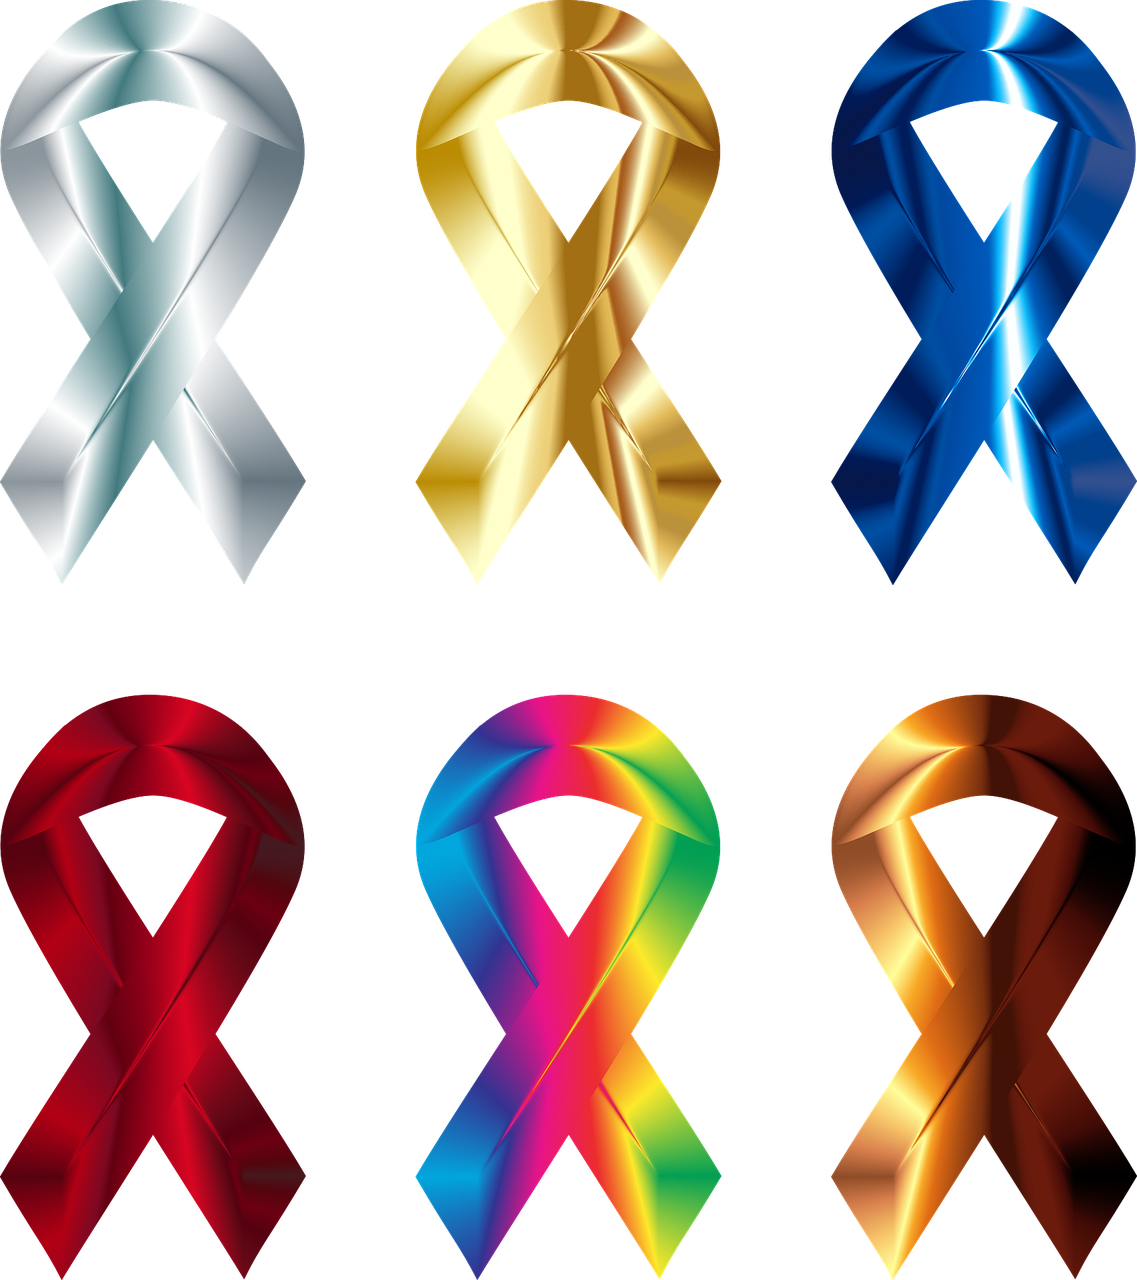 a set of six different colored ribbons on a black background, an illustration of, by David Burton-Richardson, flickr, computer art, shiny metallic glossy skin, awareness, color vector, disease